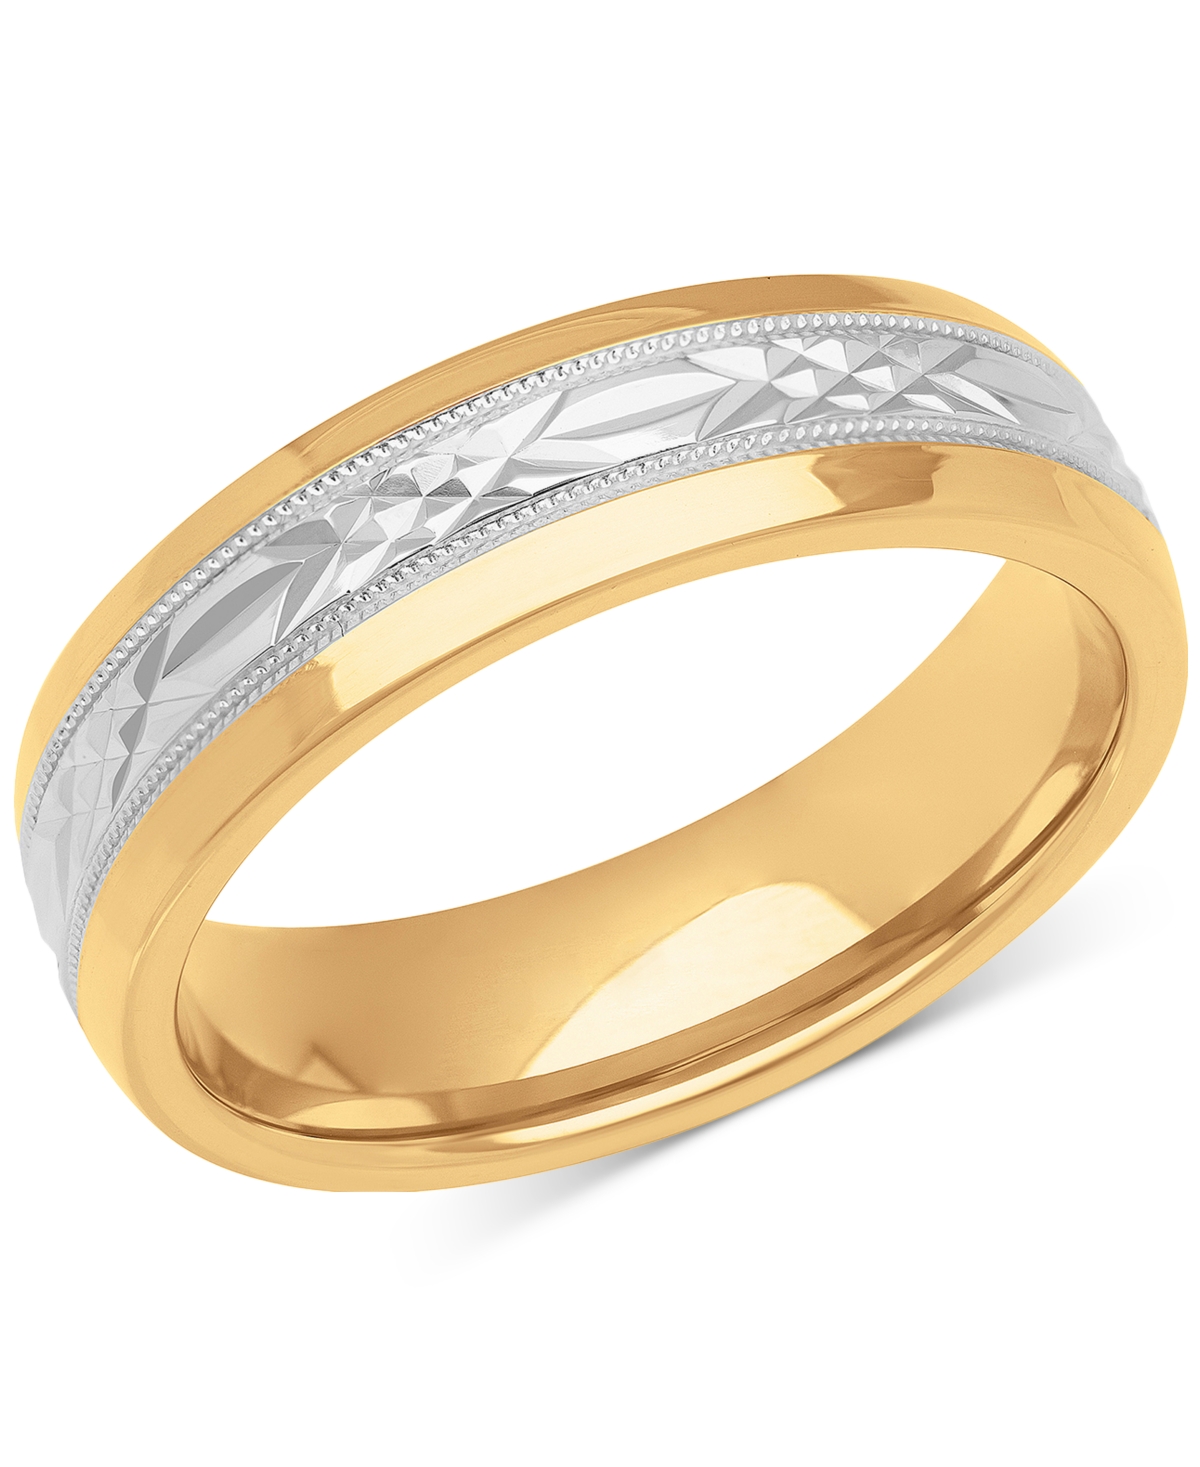 Macy's Men's Carved & Beaded Wedding Band In Sterling Silver & 18k Gold-plate In Two-tone